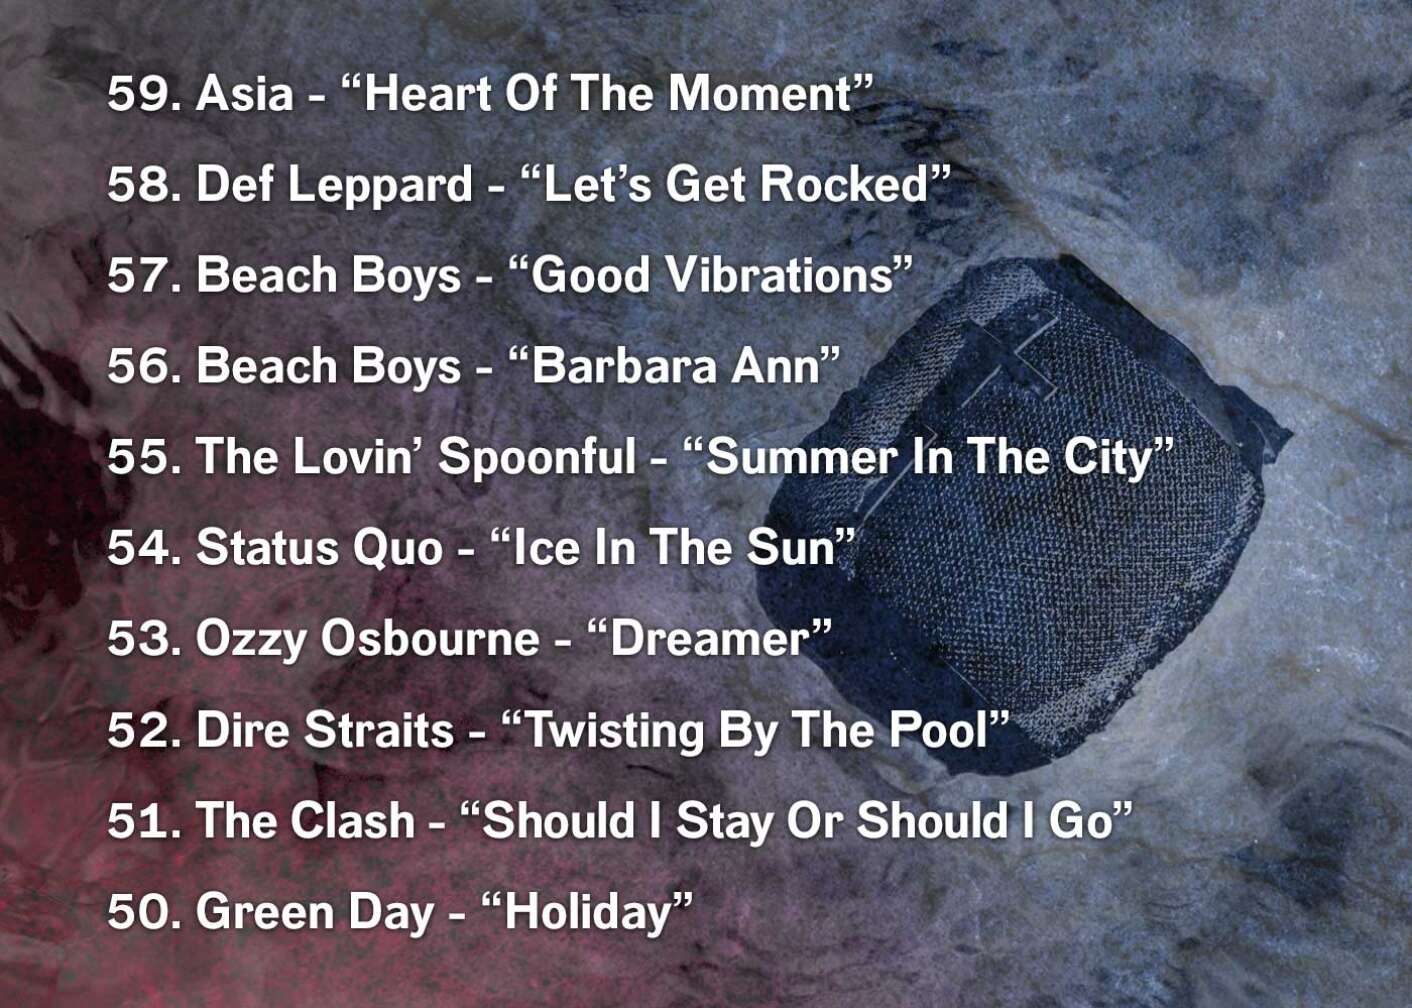 59. Asia - “Heart Of The Moment” 58. Def Leppard - “Let’s Get Rocked” 57. Beach Boys - “Good Vibrations” 56. Beach Boys - “Barbara Ann” 55. The Lovin’ Spoonful - “Summer In The City” 54. Status Quo - “Ice In The Sun” 53. Ozzy Osbourne - “Dreamer” 52. Dire Straits - “Twisting By The Pool” 51. The Clash - “Should I Stay Or Should I Go” 50. Green Day - “Holiday”